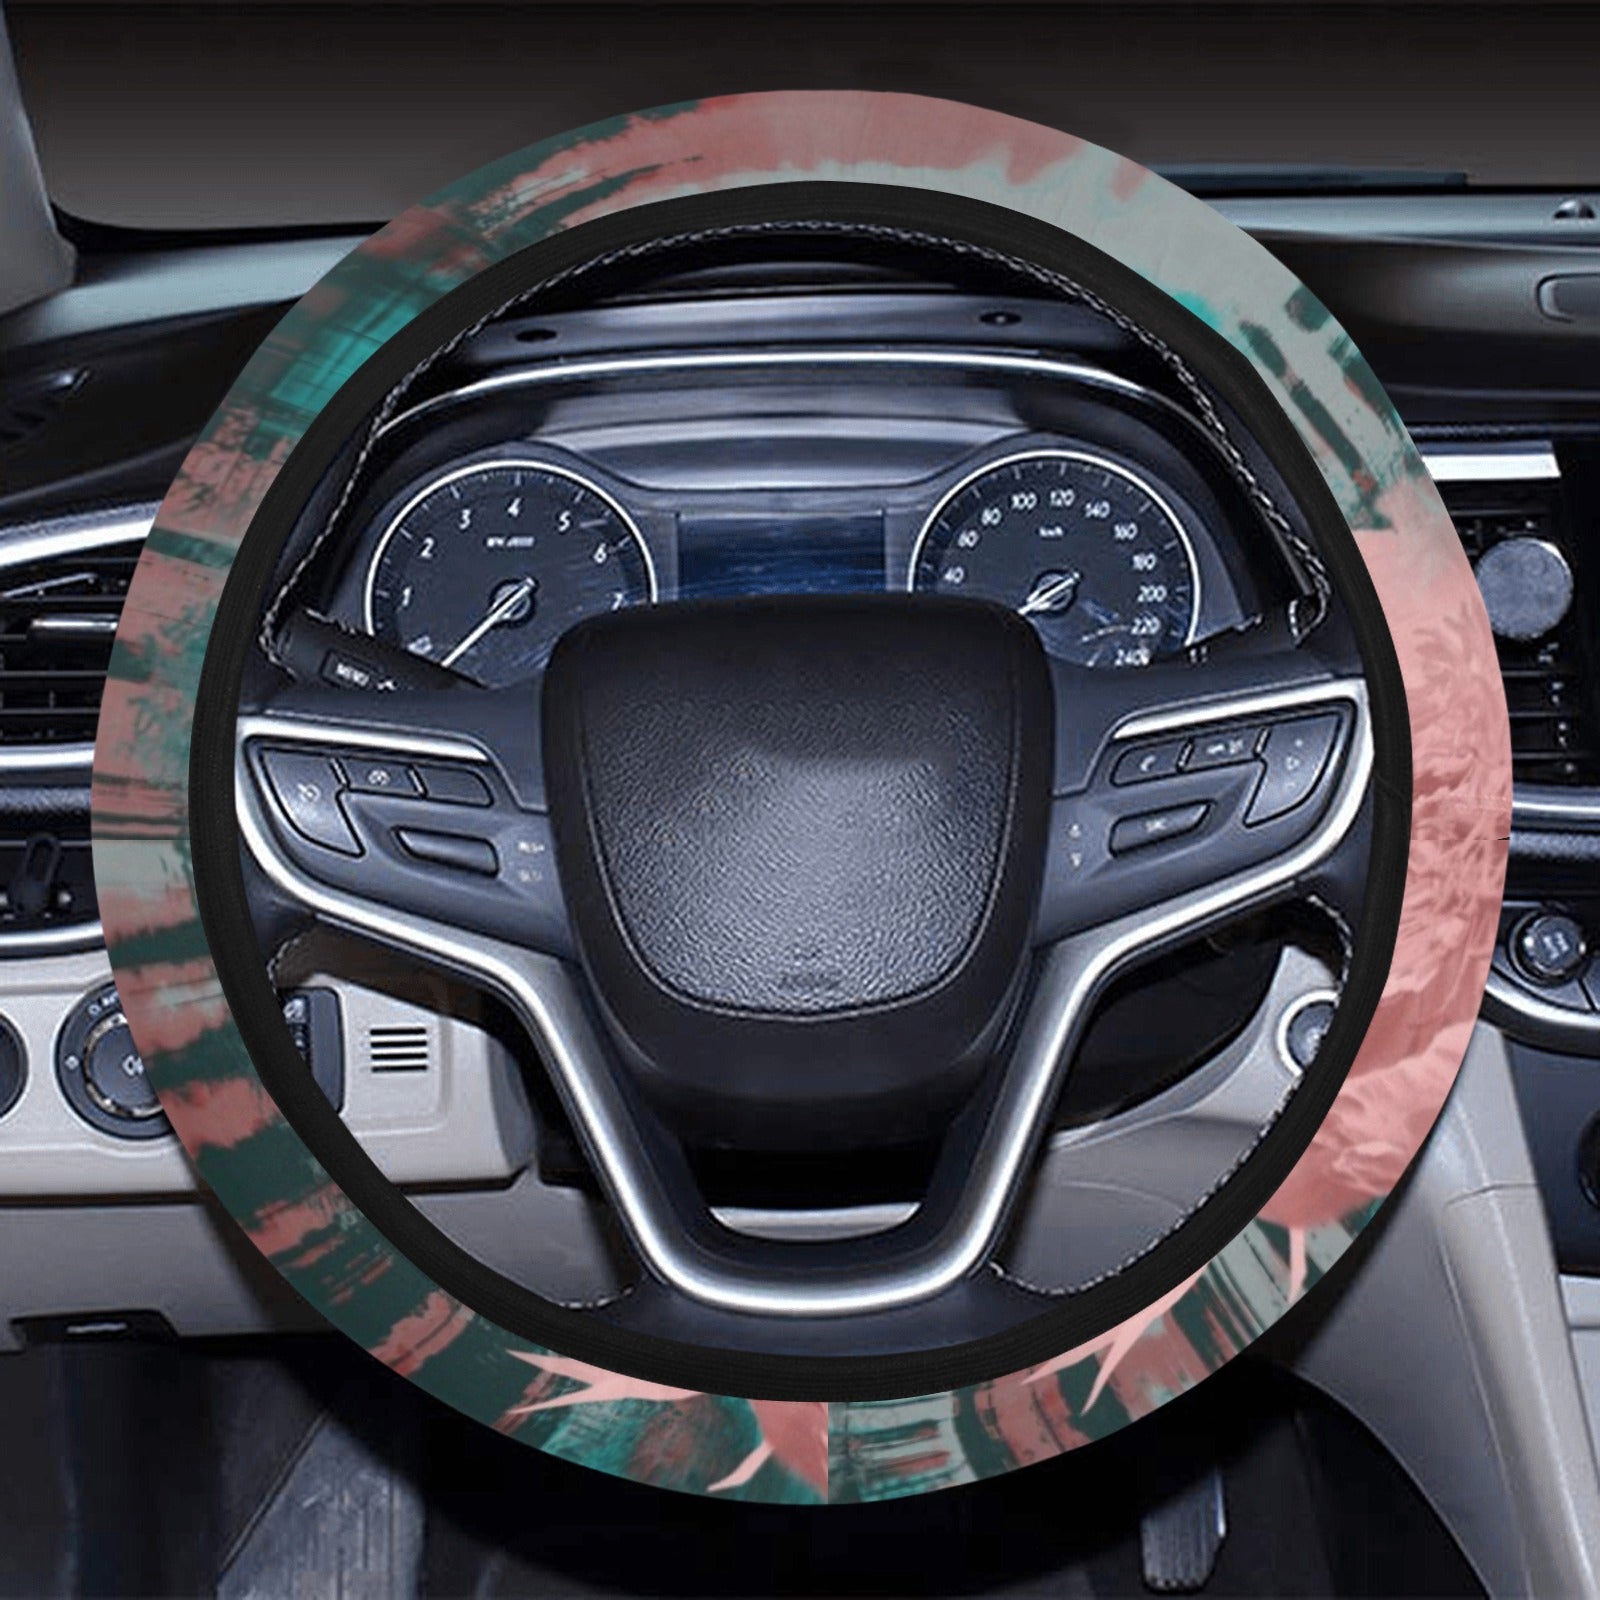 Pink Abstract Floral Steering Wheel Cover